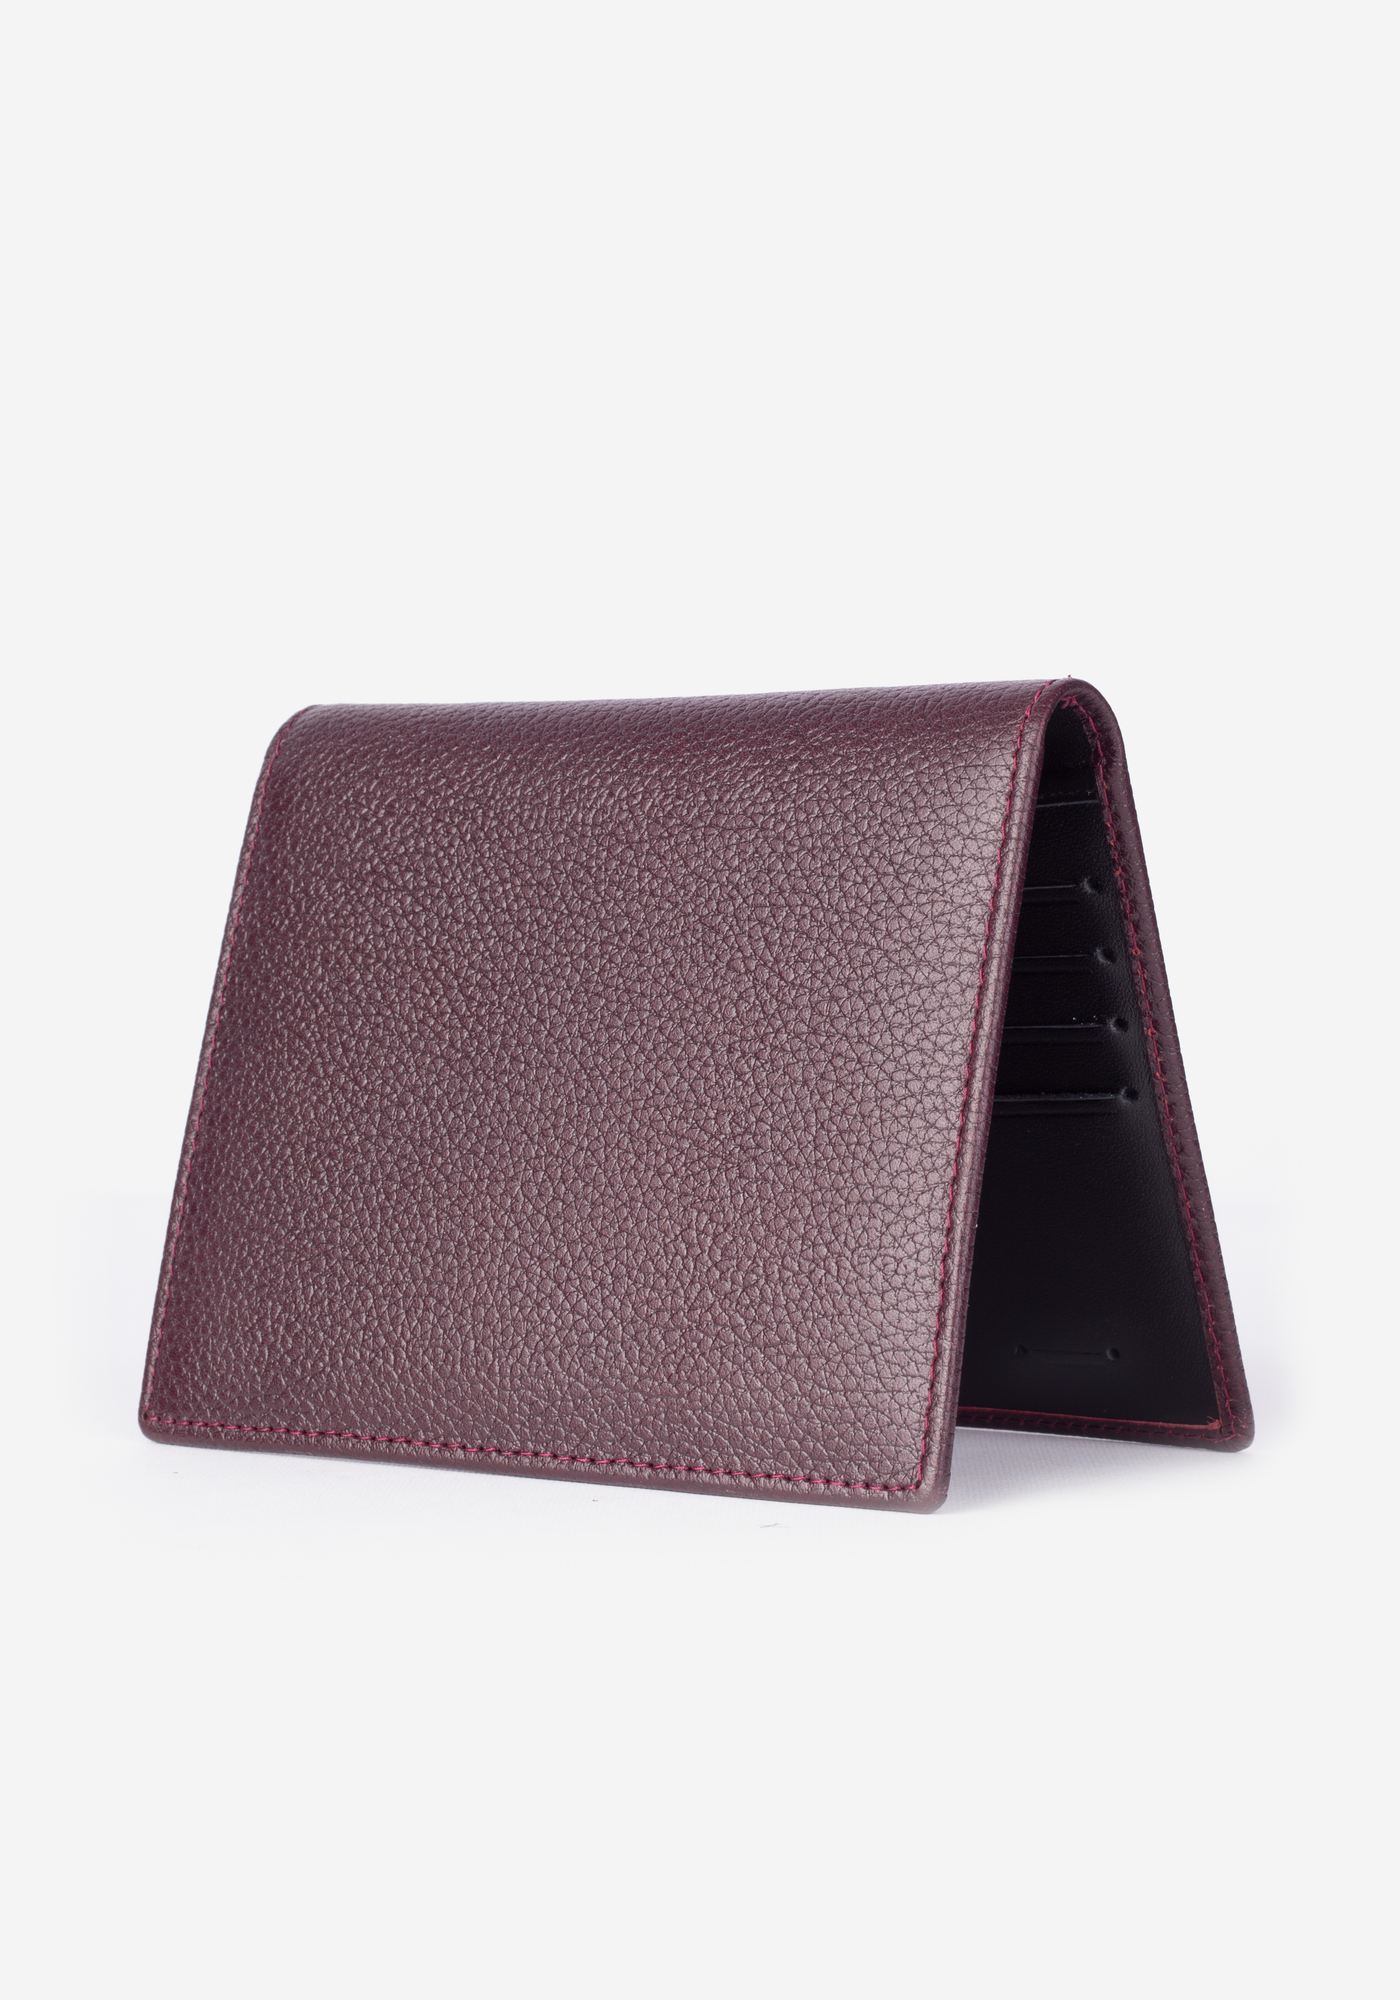 WAL018 / Burgundy Leather Wallet